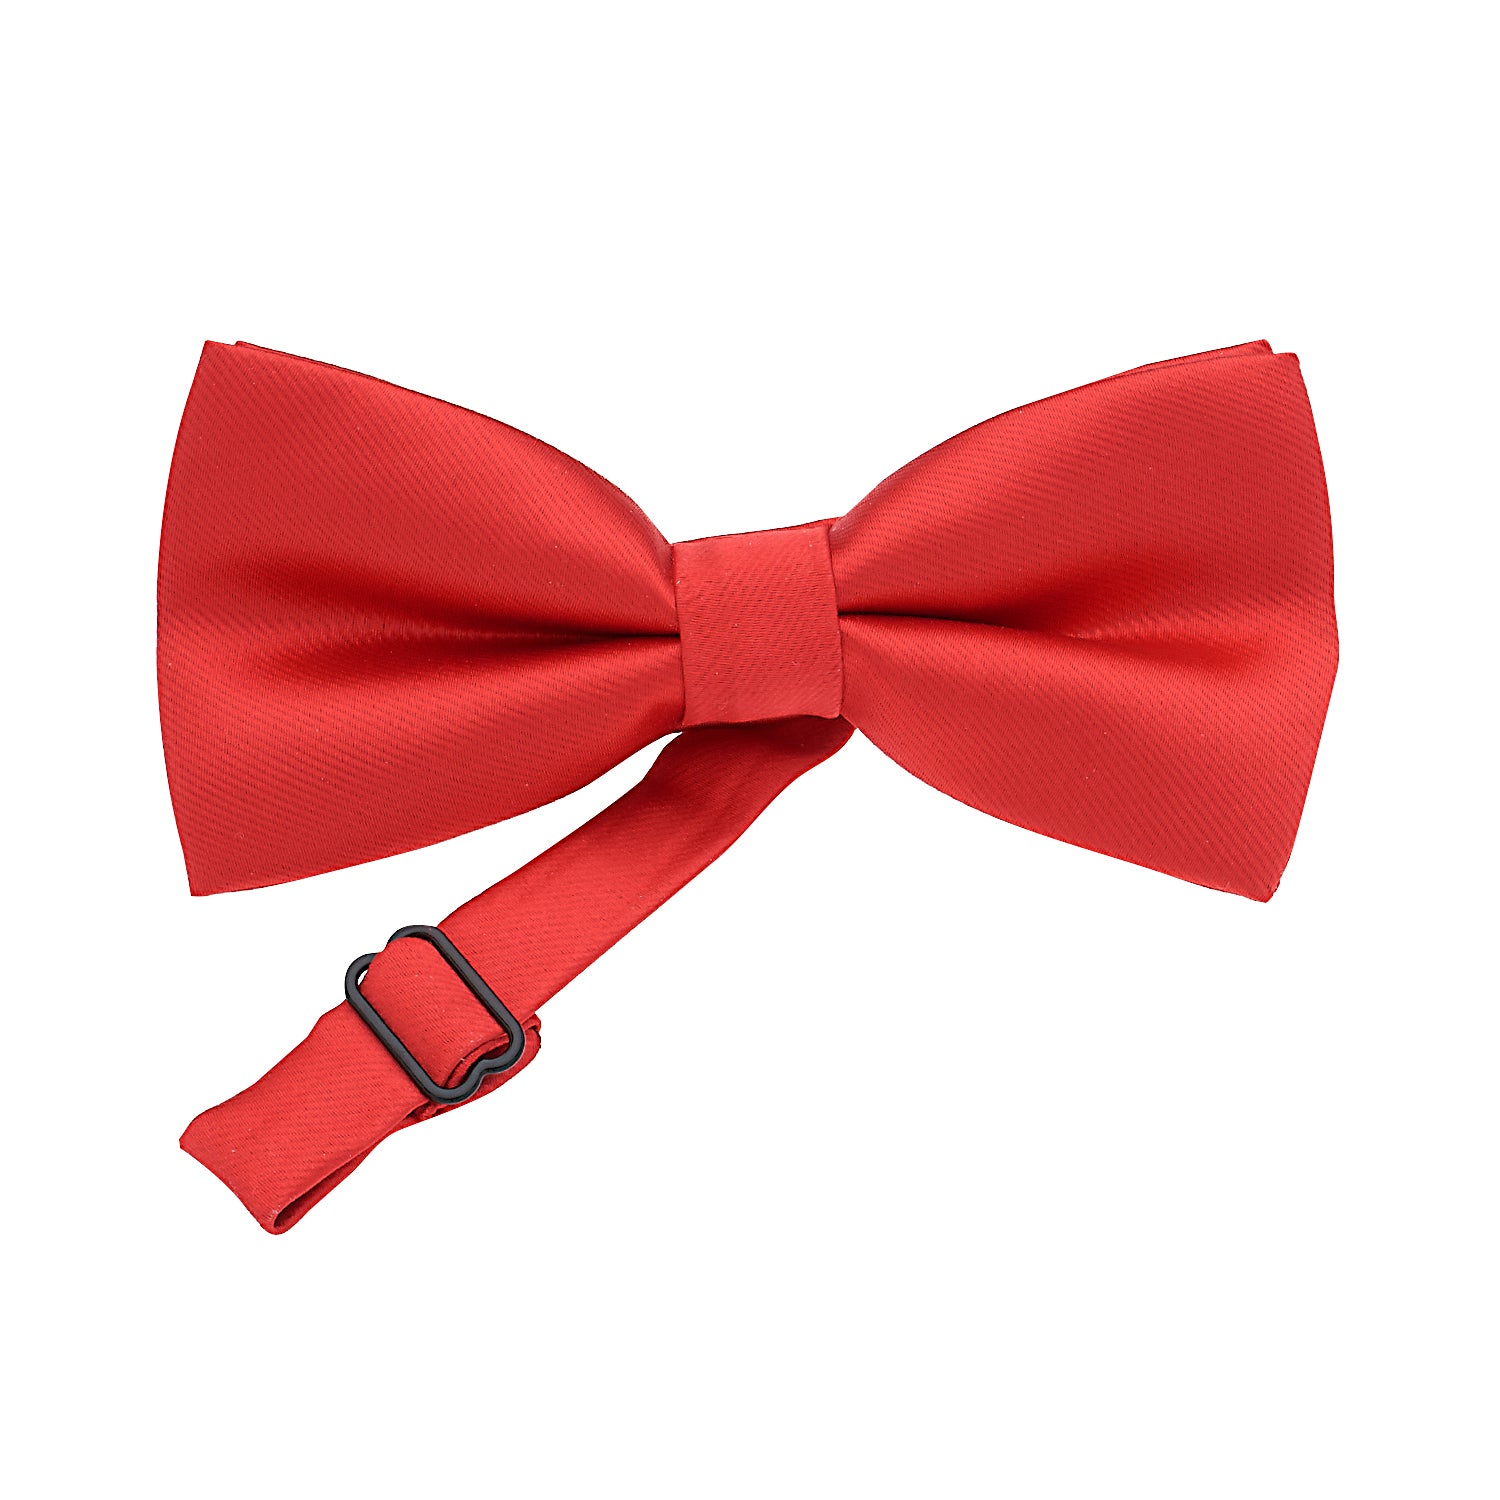 Red Bowtie-The Suit Spot-Wedding Suits-Wedding Tuxedos-Groomsmen Suits-Groomsmen Tuxedos-Slim Fit Suits-Slim Fit Tuxedos-Online wedding suits